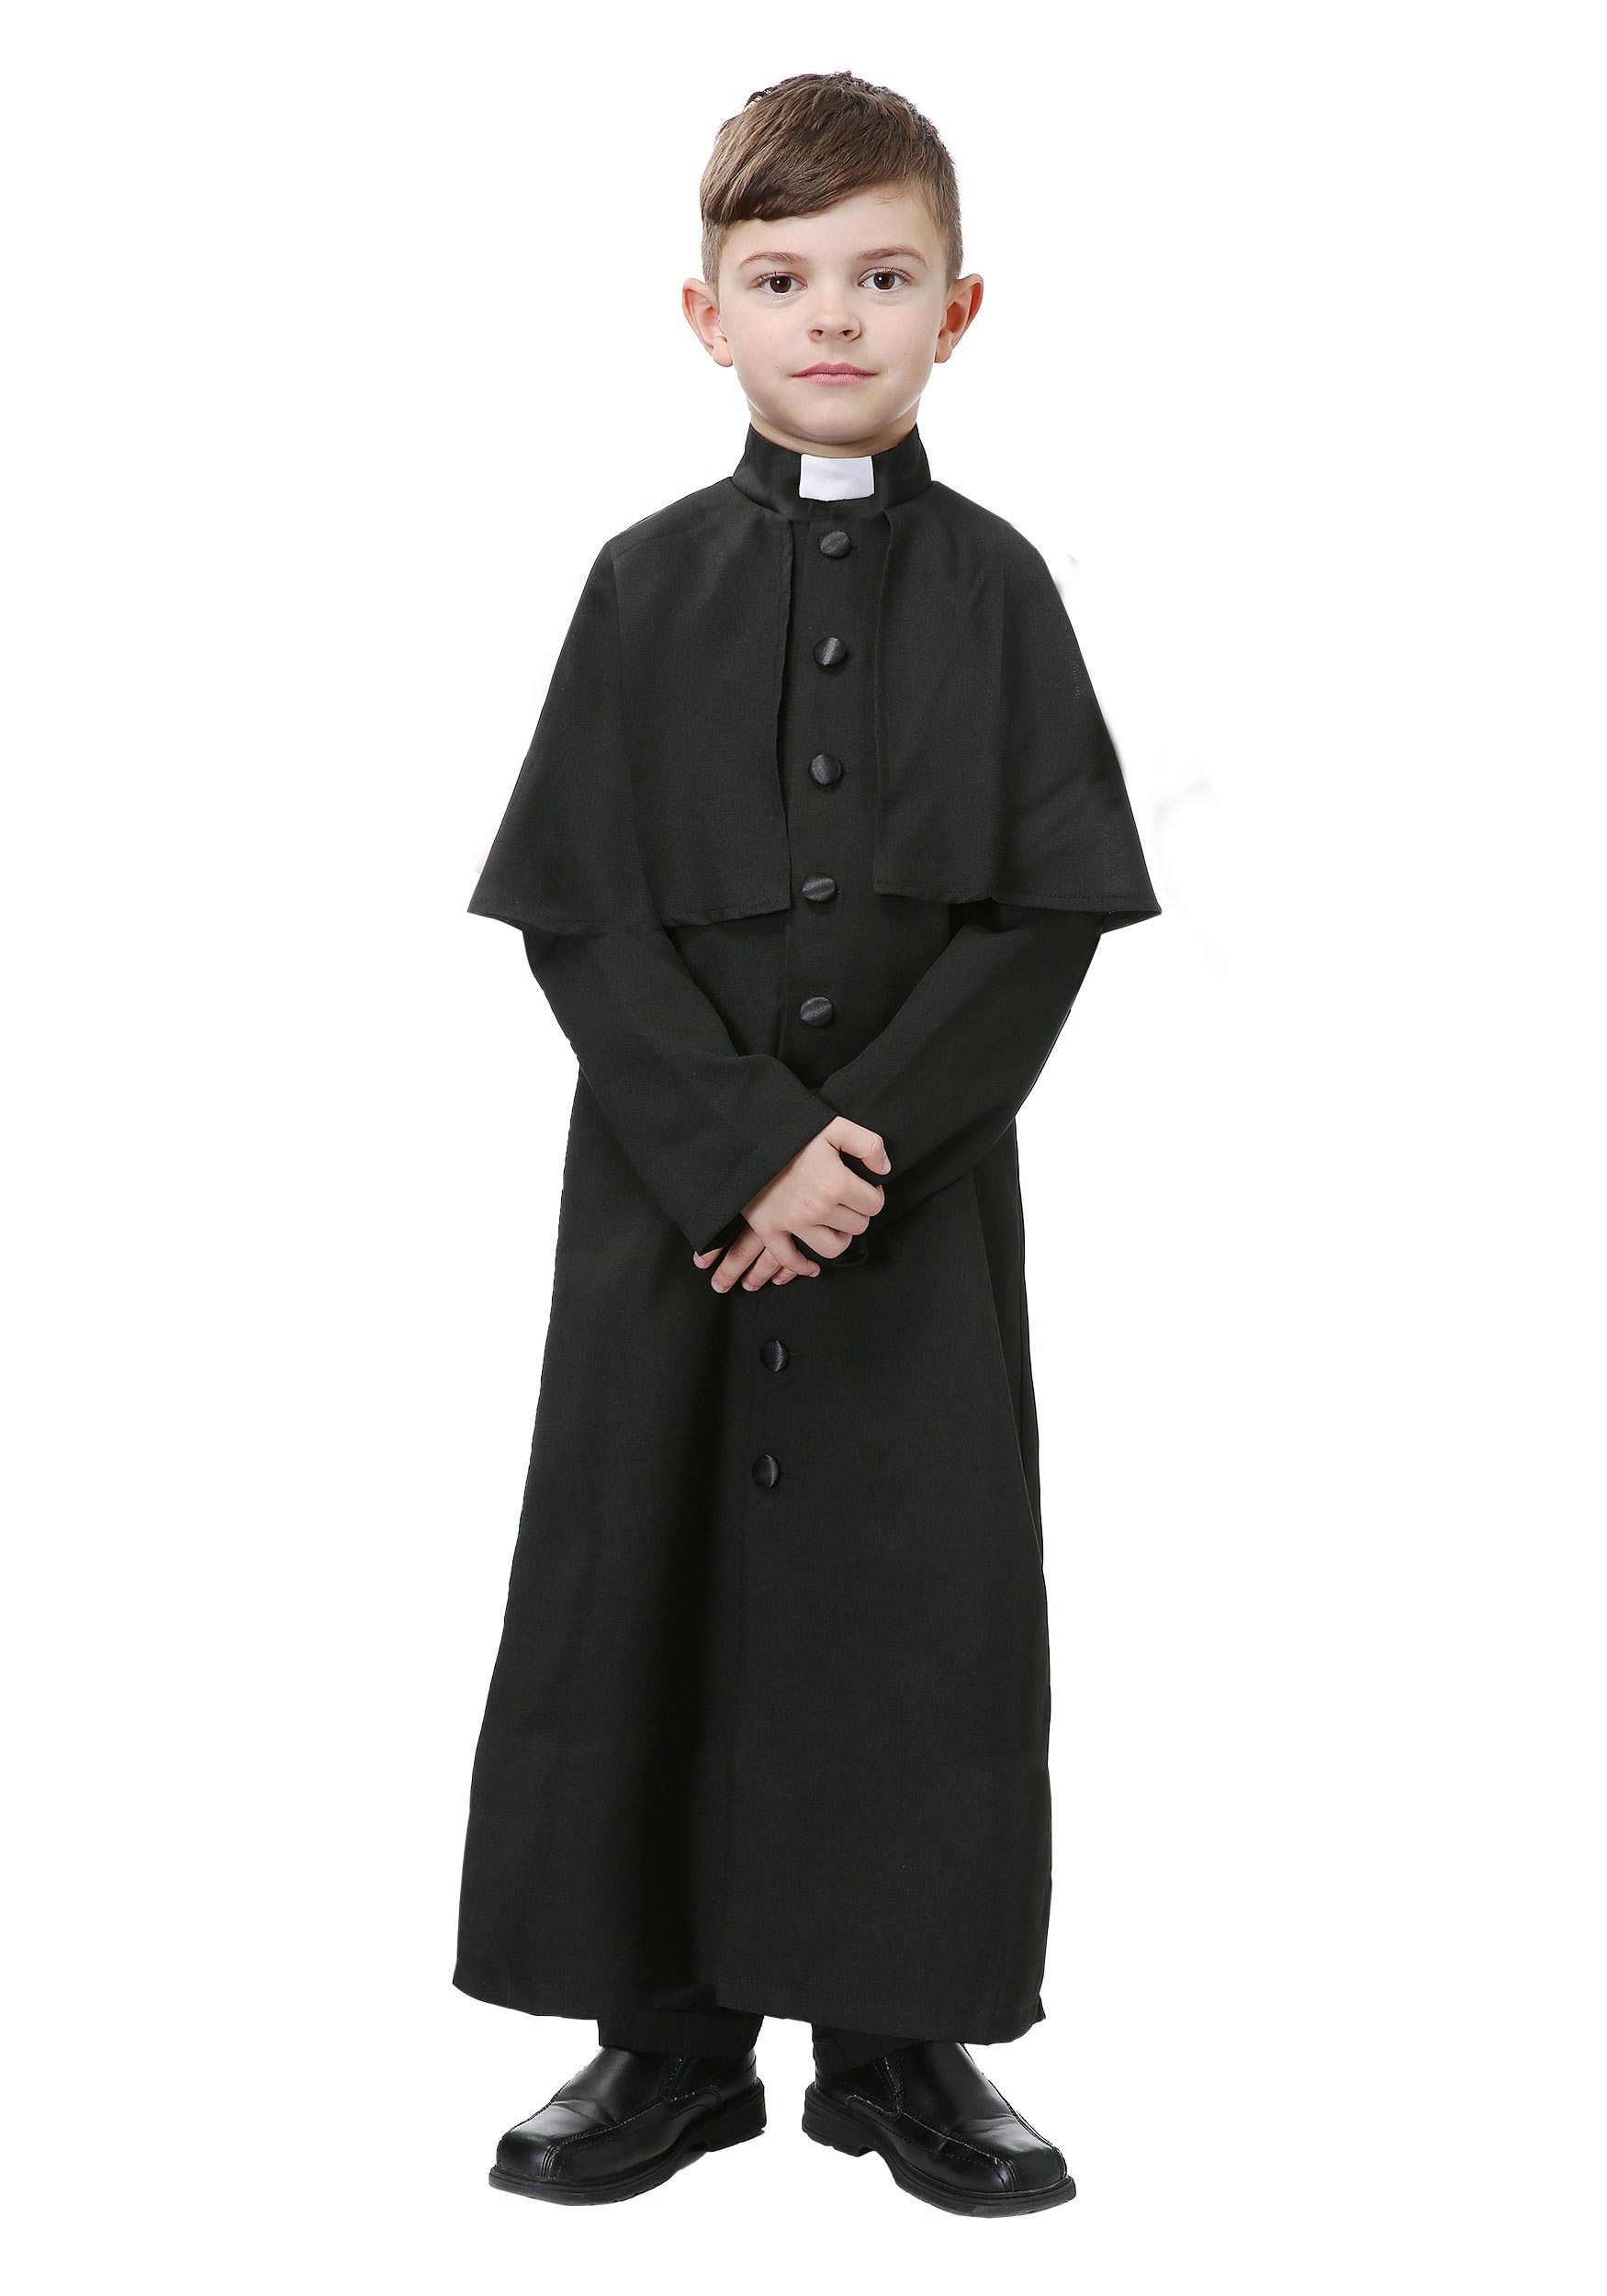 Deluxe Priest Costume For Kids